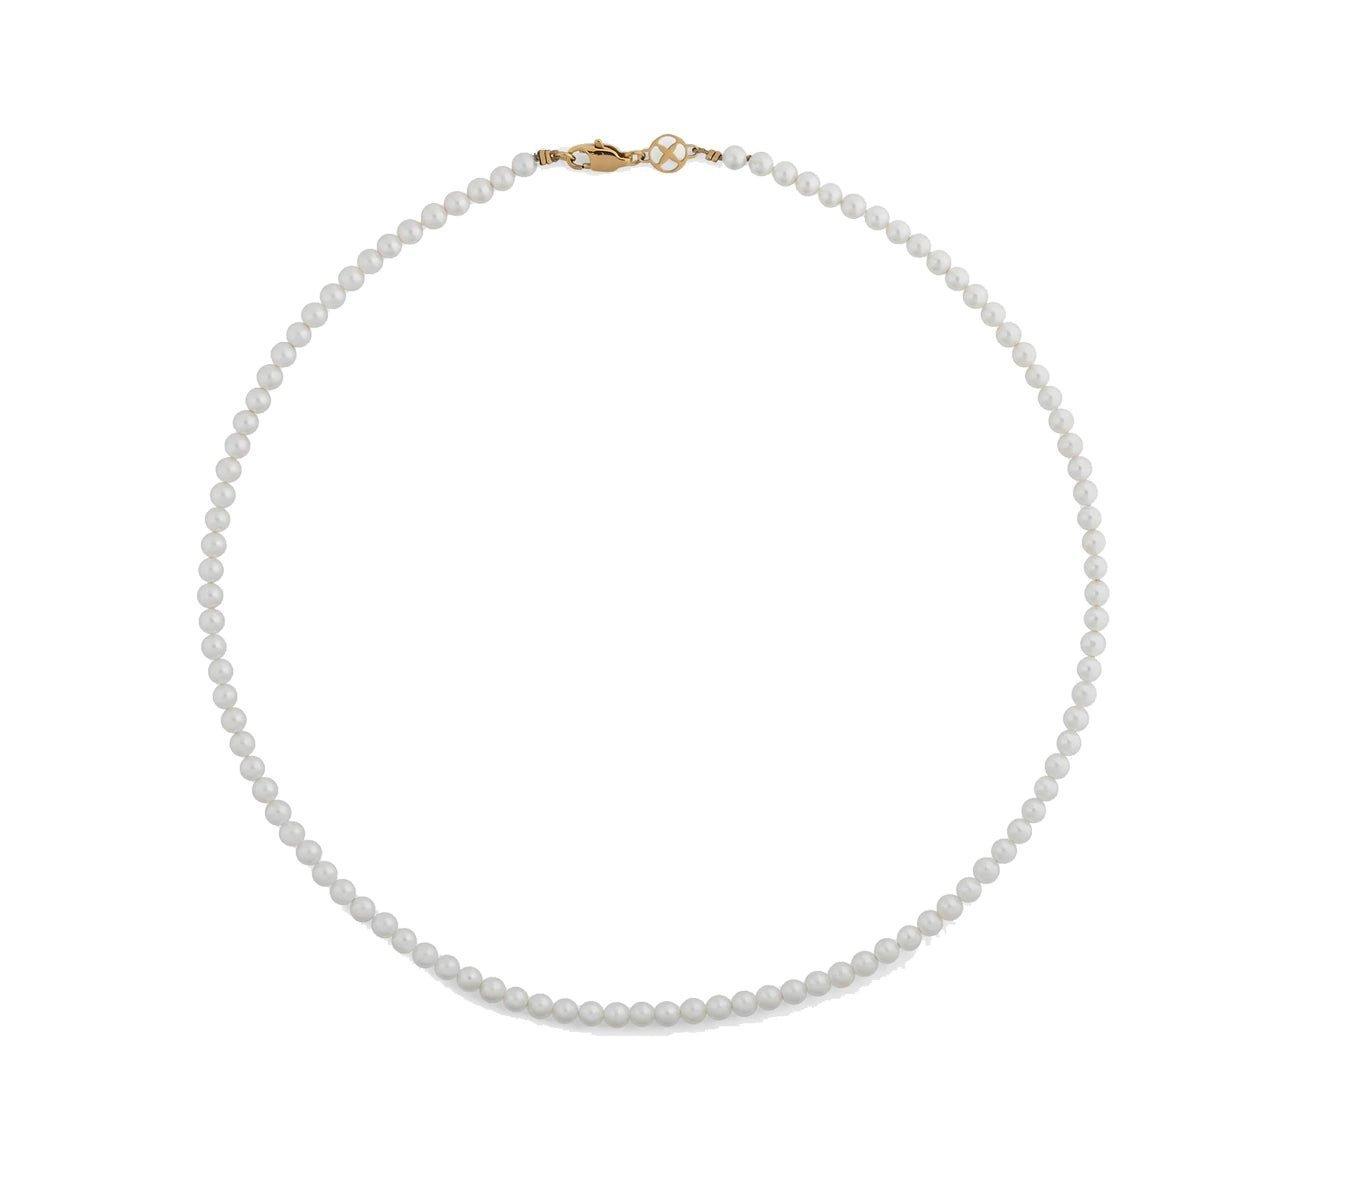 VITALY Trace Gold Necklace - SUPERCONSCIOUS BERLIN